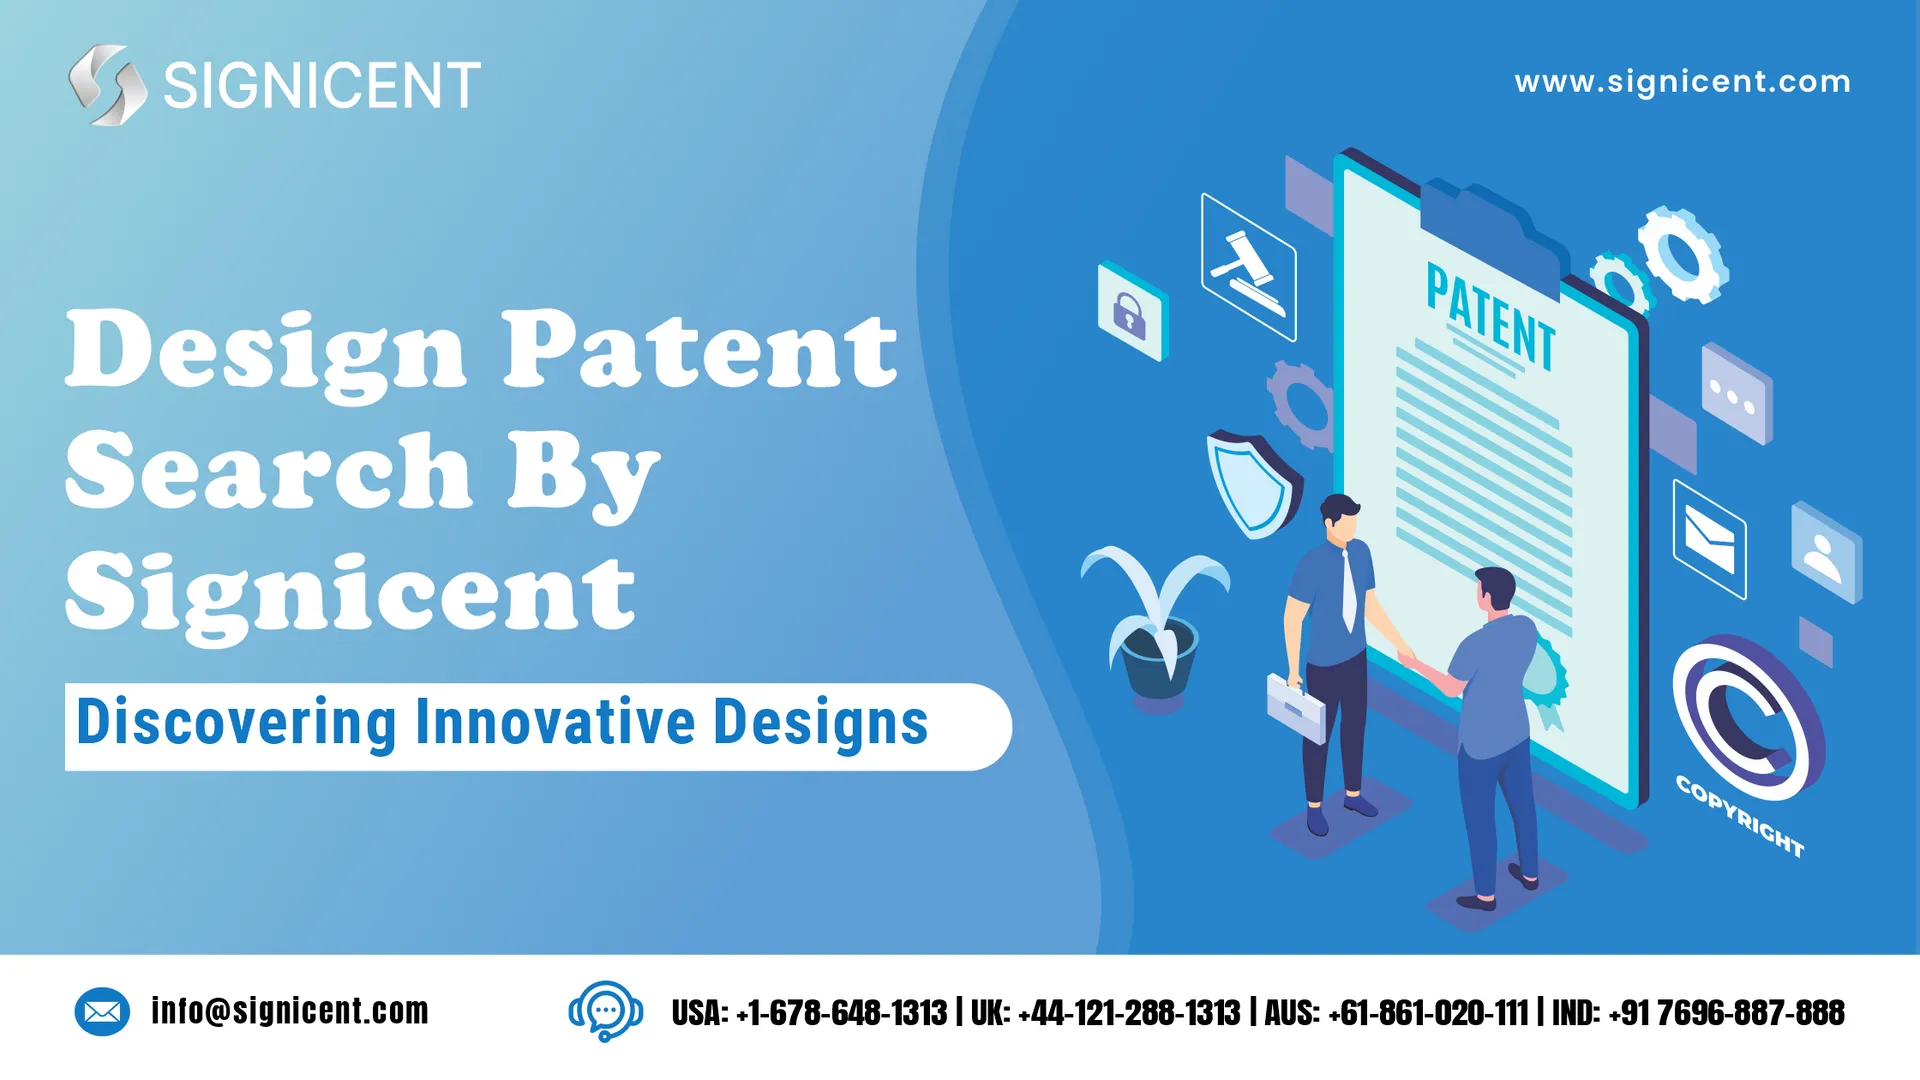 Design Patent Search | Signicent LLP

https://signicent.com/patent-design-search/

Discover the power of design patents with Signicent. Our expert team conducts comprehensive Design Patent Searches using cutting-edge technology, global brand databases, and DesignView resources. We analyze the visual characteristics, configurations, and ornamental appearances of your products. Whether you provide hand-drawn sketches or digital images, we ensure your designs are protected. Trust Signicent to safeguard your unique innovations with precision and professionalism.